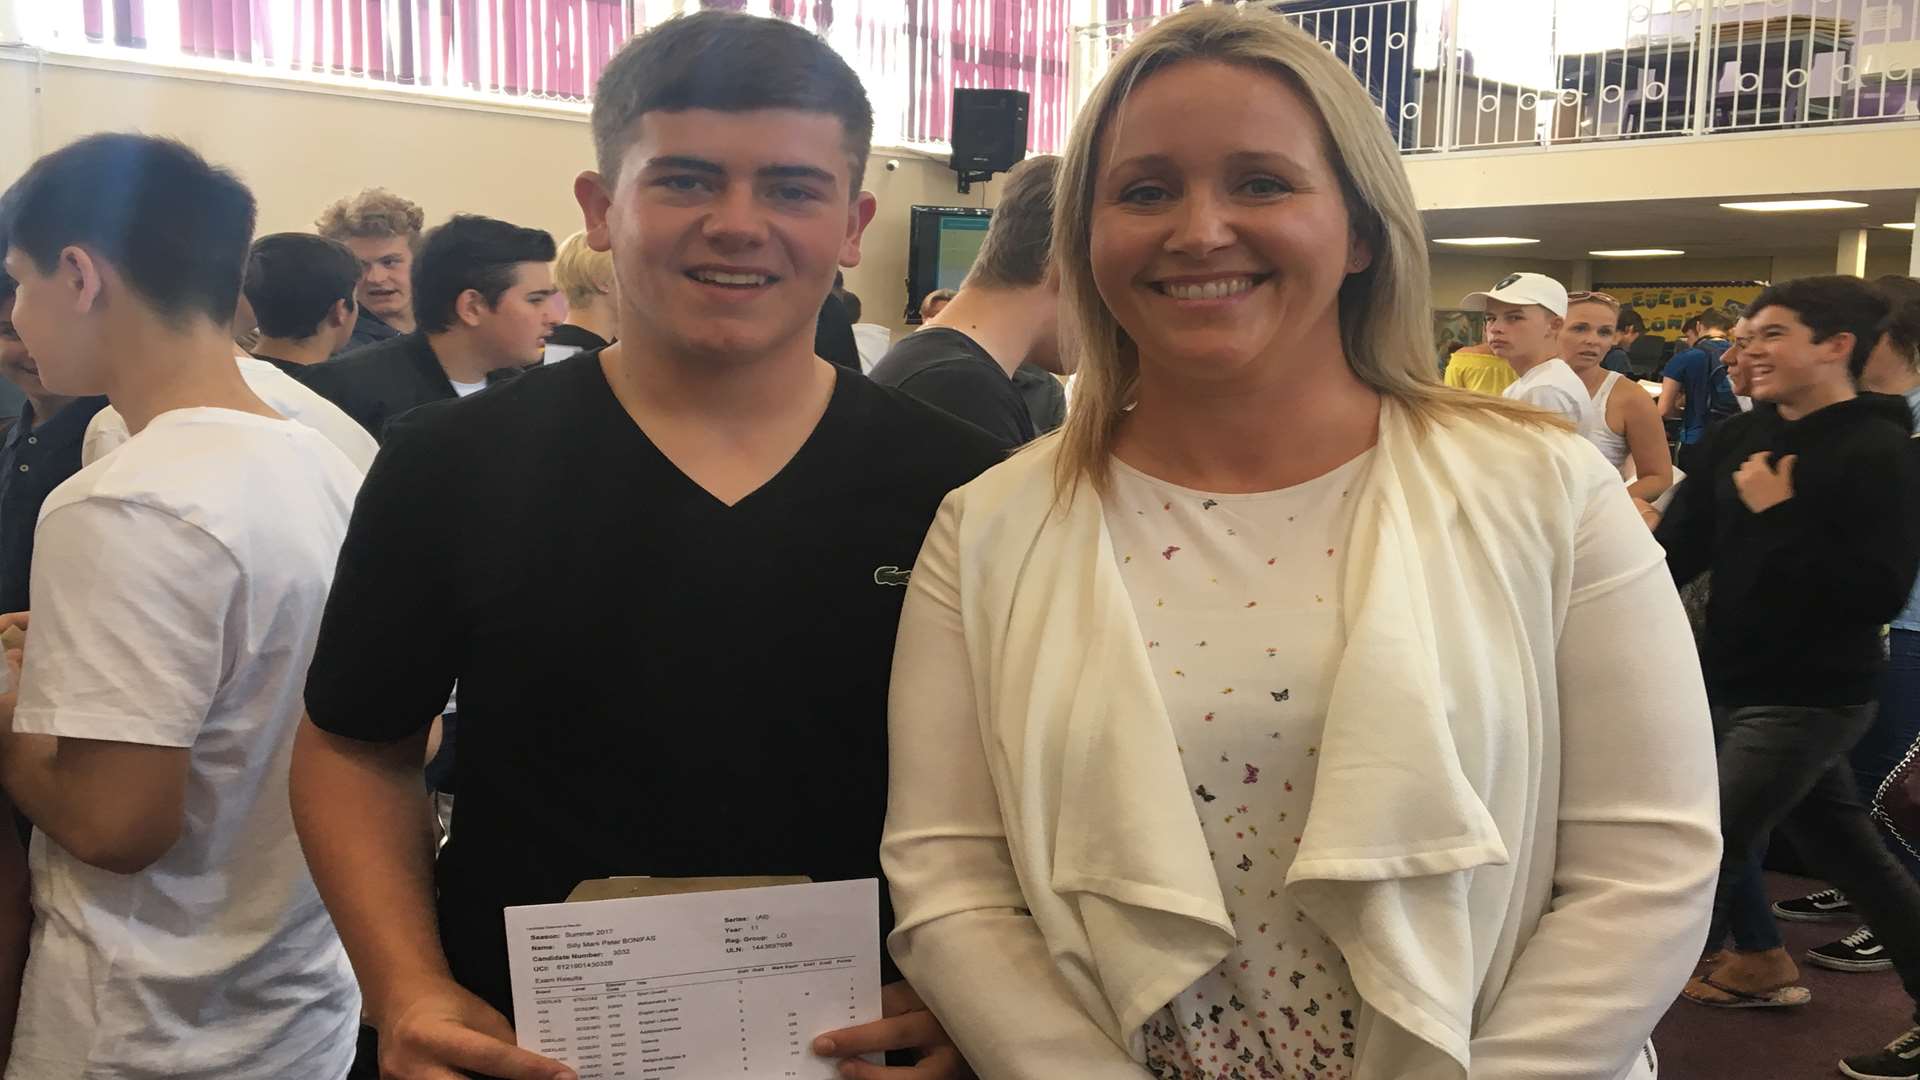 Pictured with head teacher Kerri Edge, Greenacre Academy's Billy Bonifas was delighted with his results